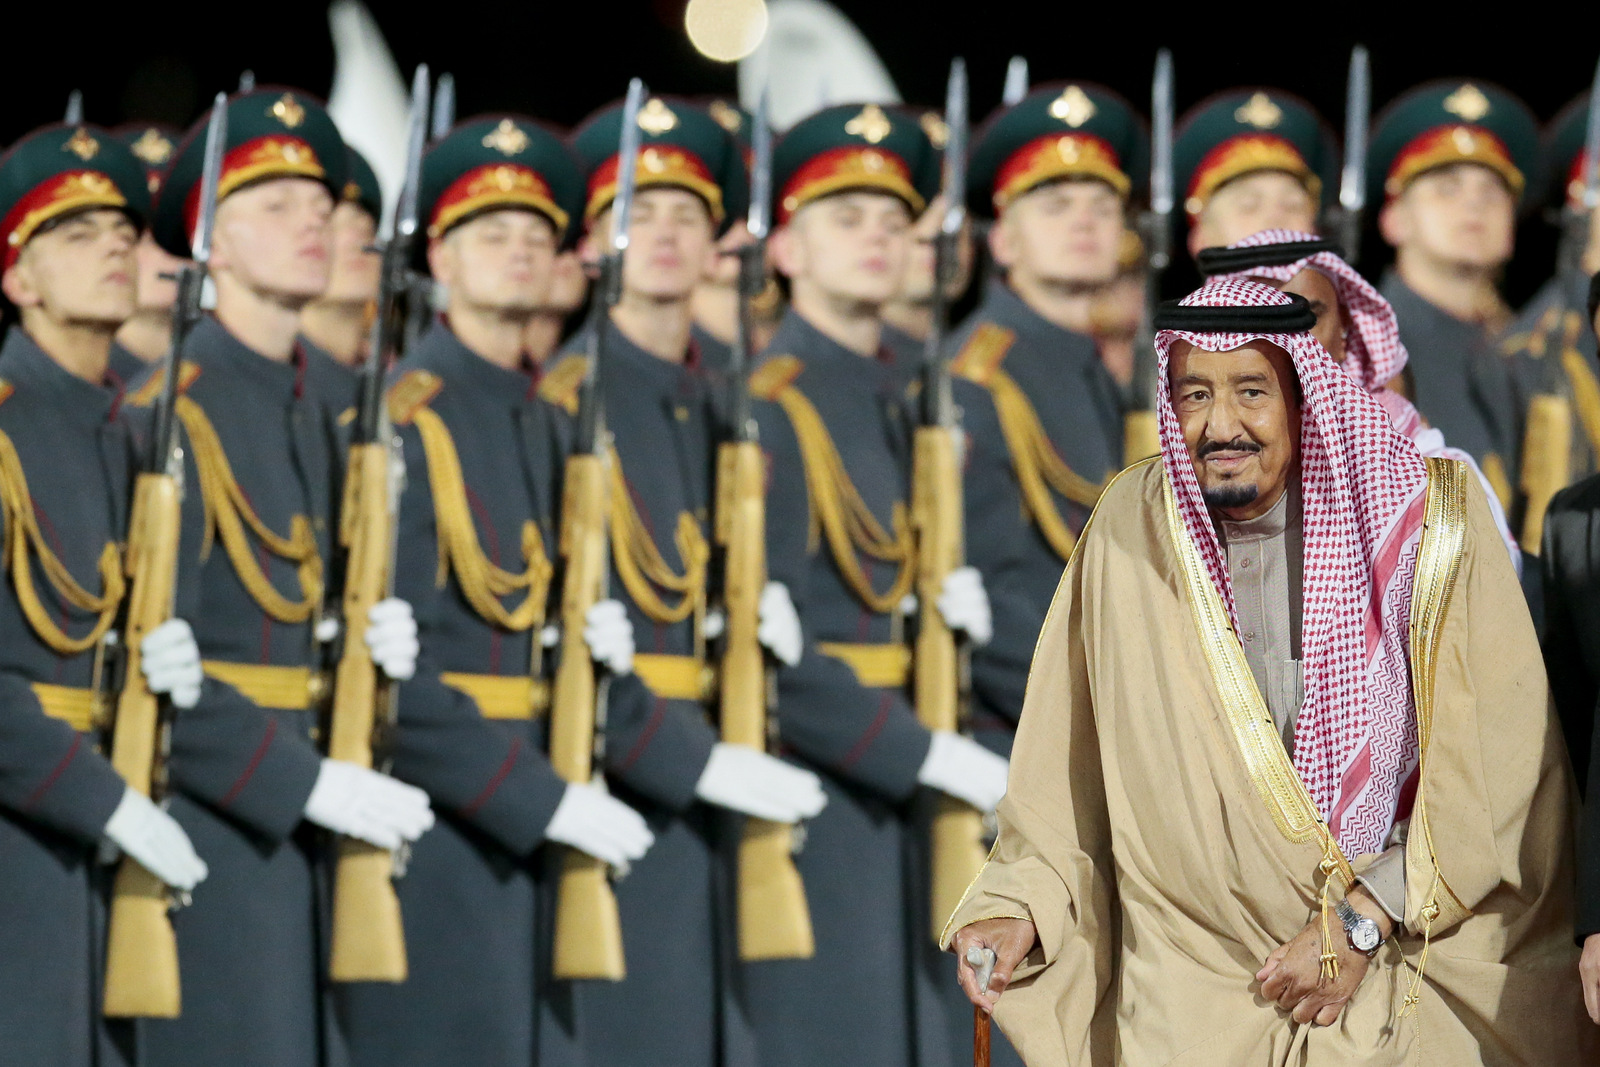 Saudi King Salman reviews a honor guards upon arrival in Moscow's Government Vnukovo airport, Russia, Wednesday, Oct. 4, 2017. The King's visit is the first trip to Russia by a sitting Saudi monarch. (AP/Ivan Sekretarev)